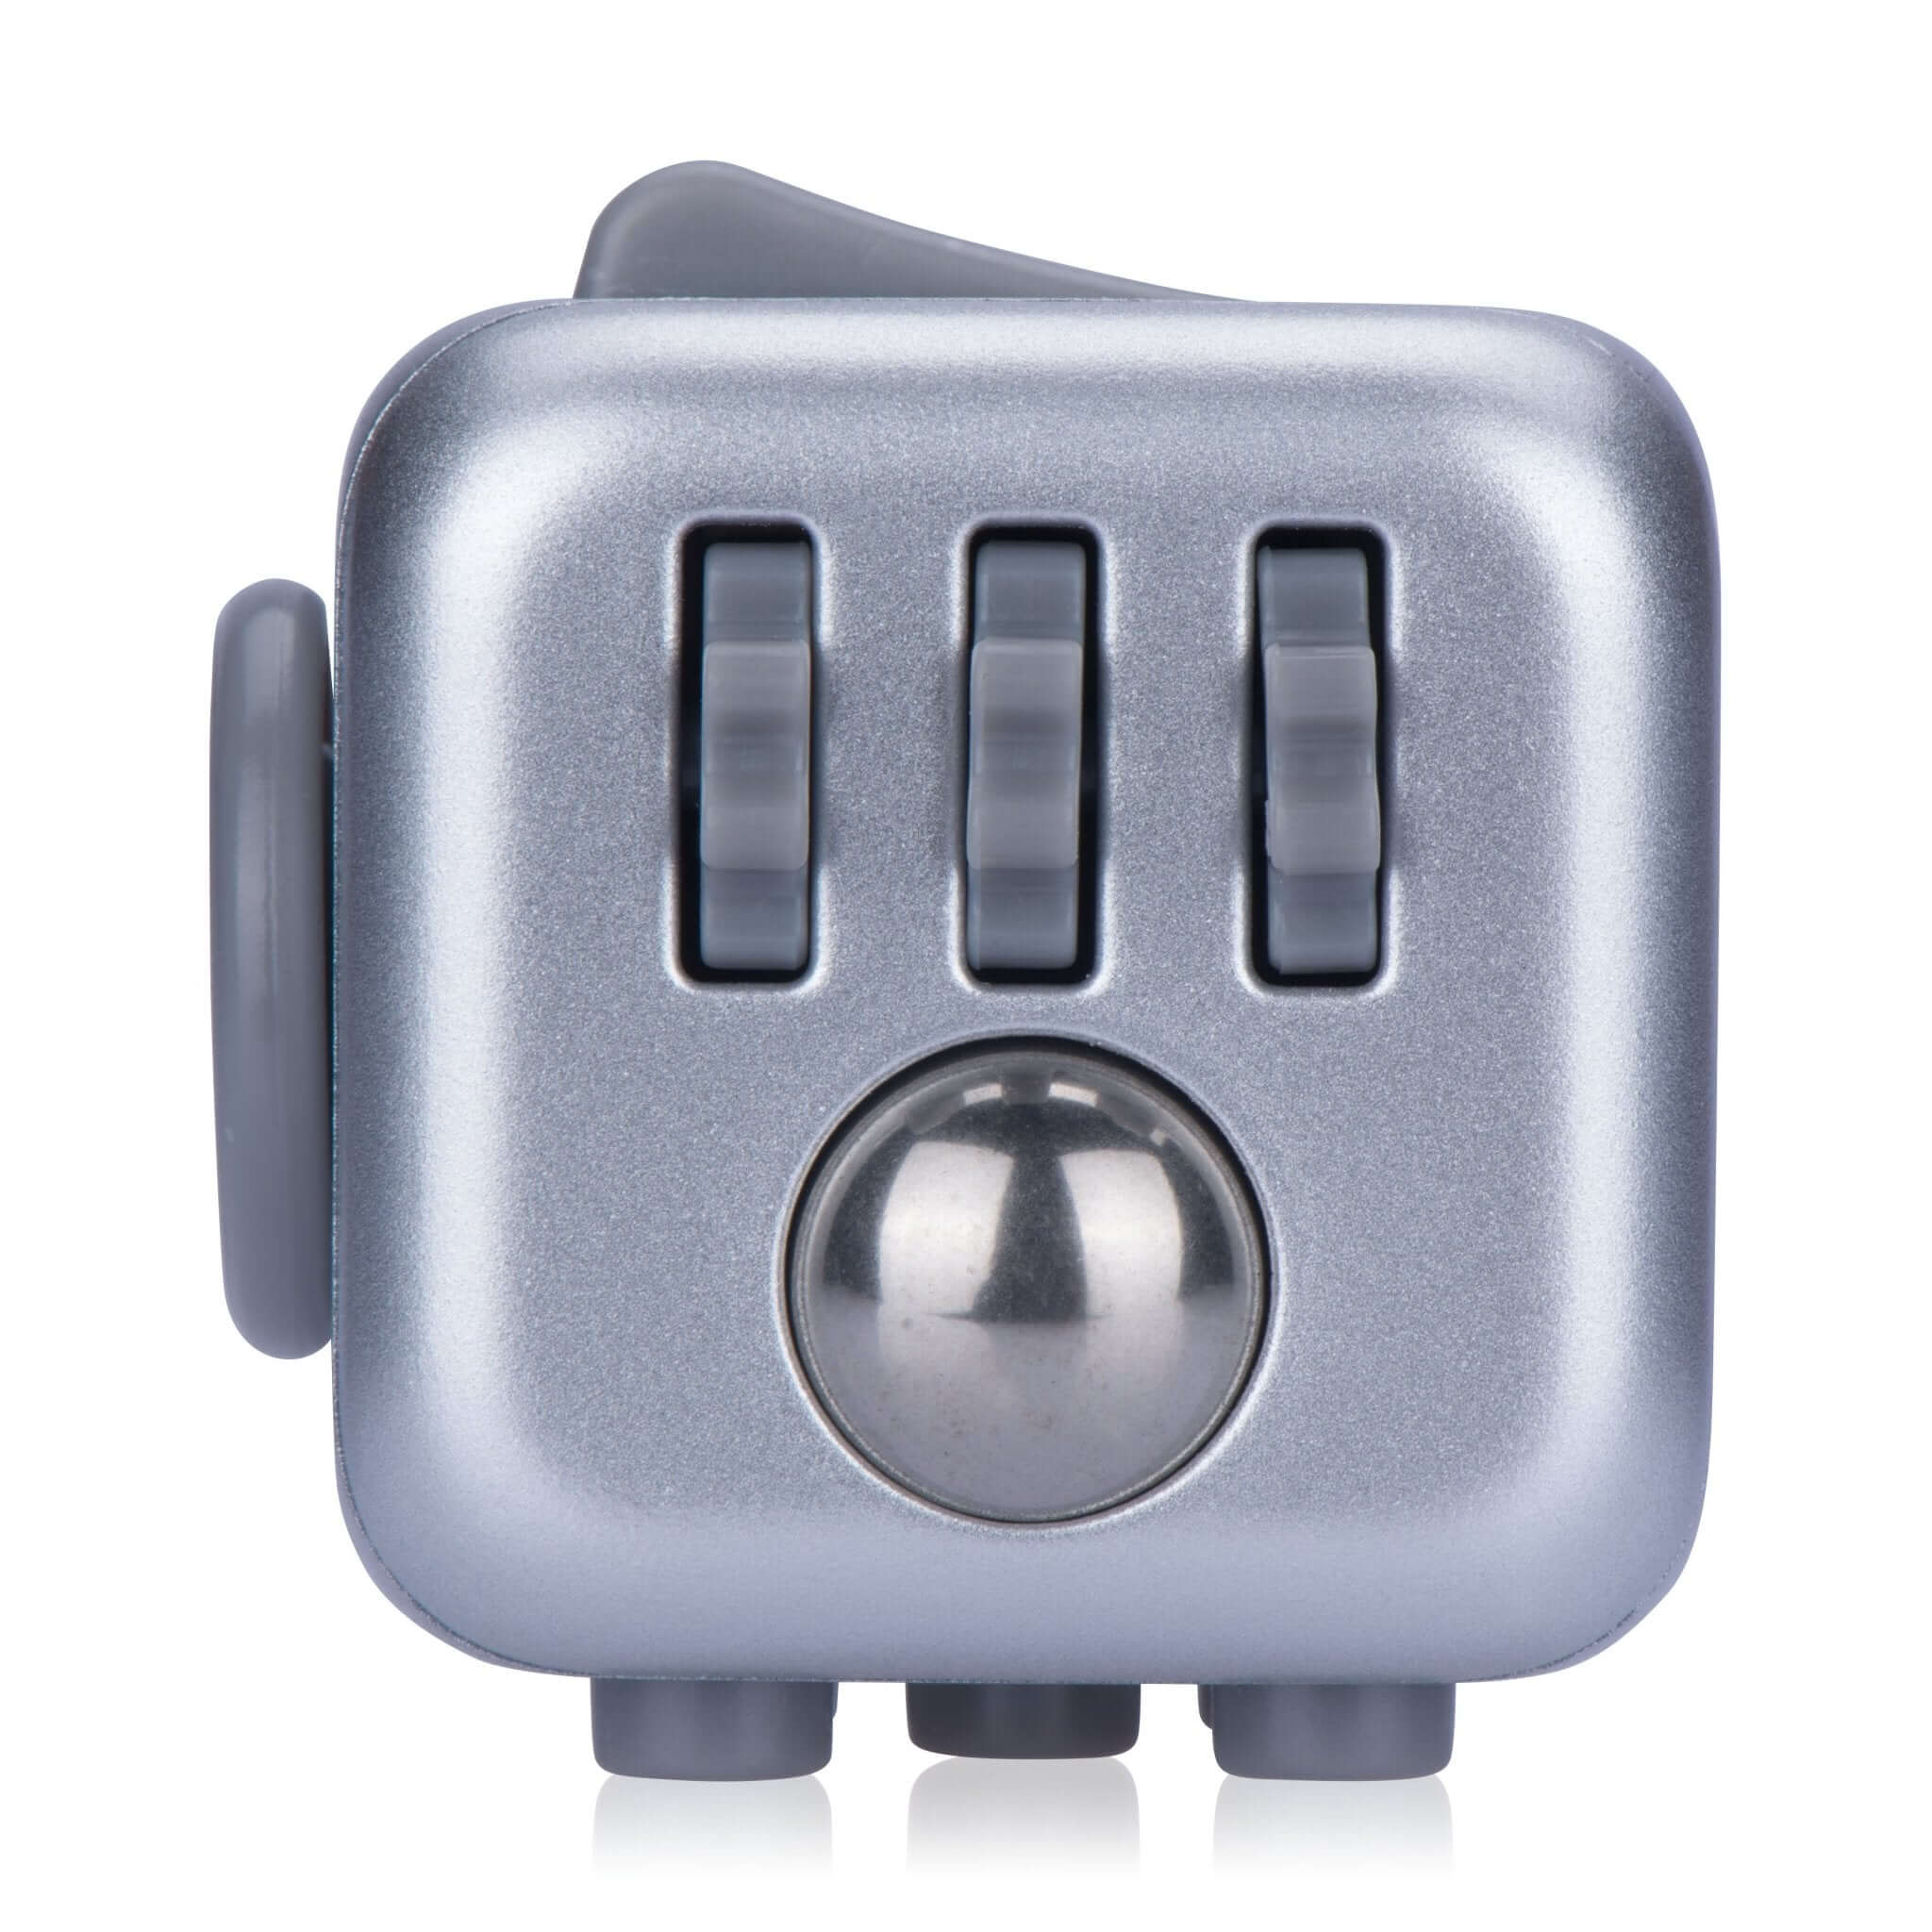 Fidget Cube by Antsy Labs Series 3 Transparent Blue - Fidget Toy Ideal for Anti-Anxiety, Adhd and Sensory Play by Zuru